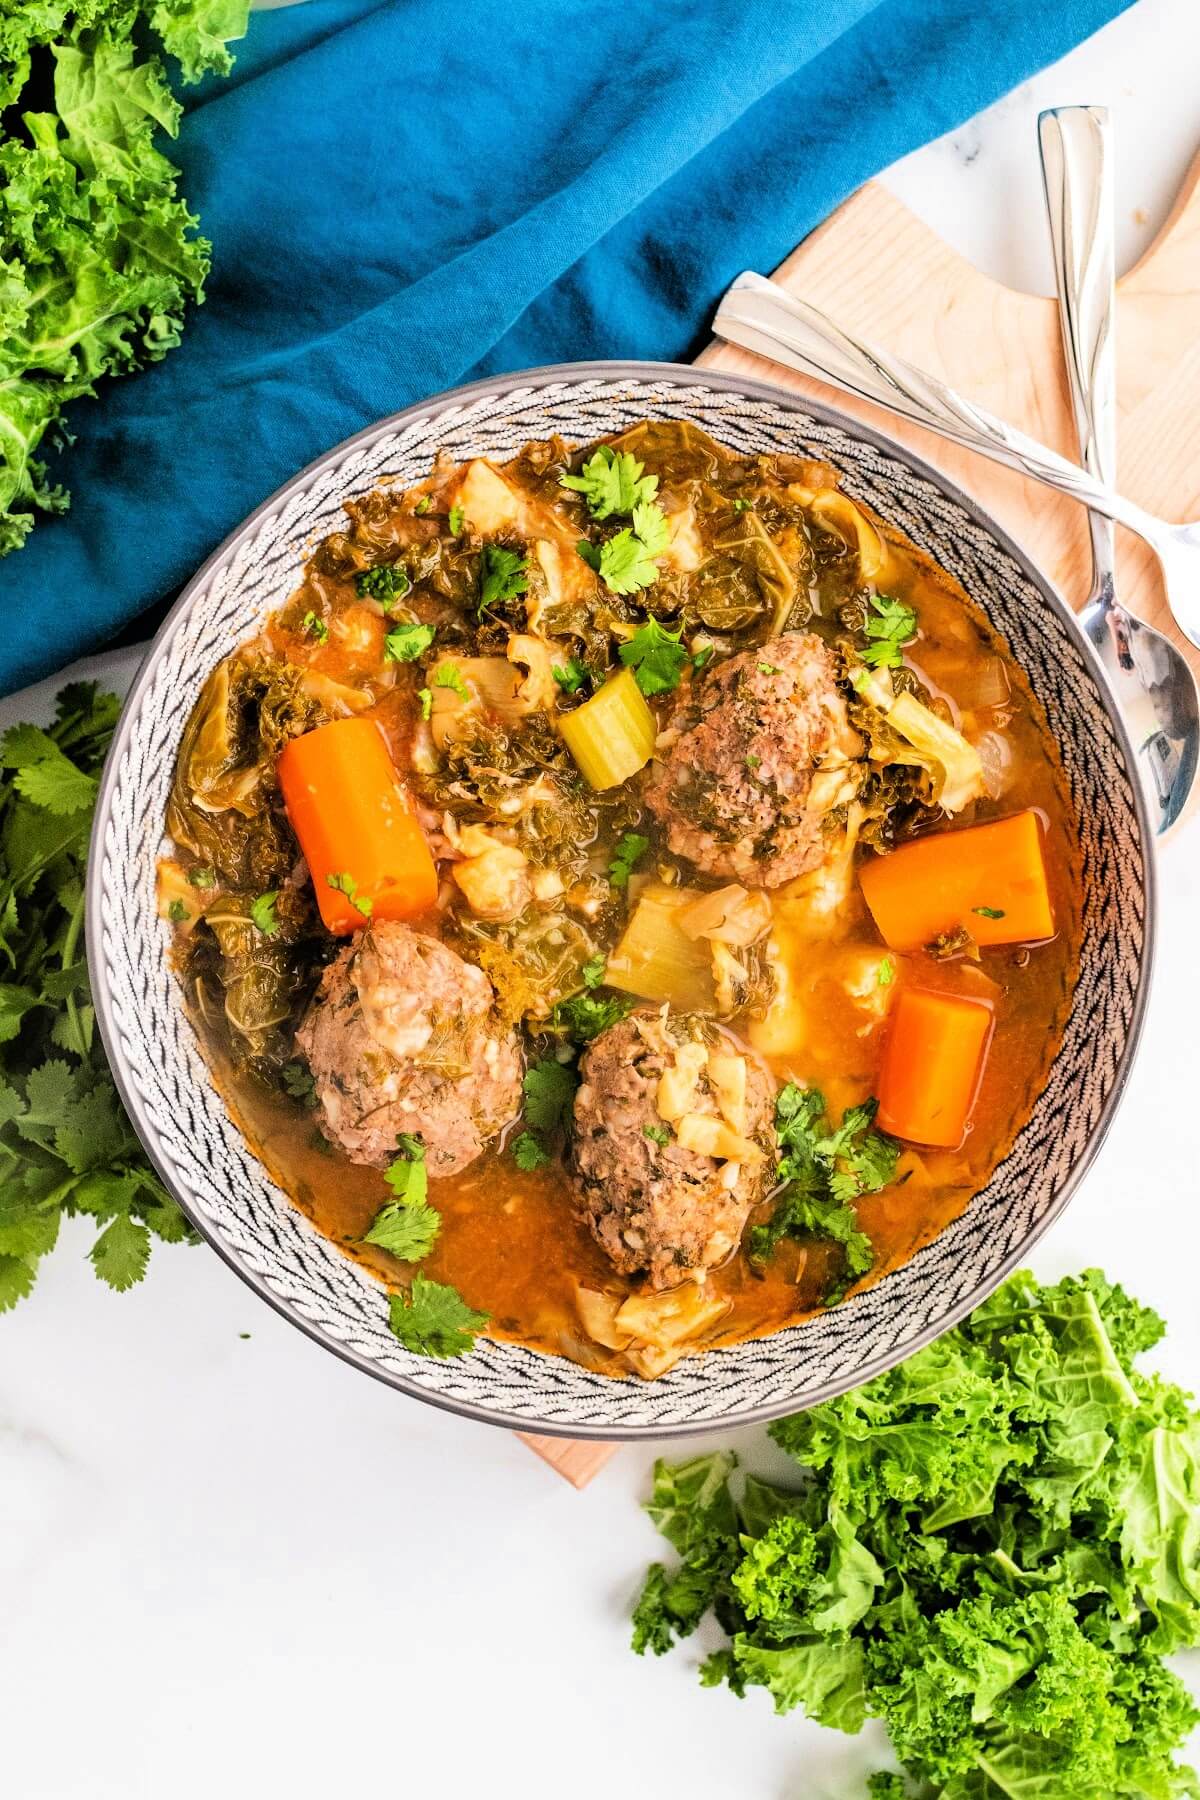 Bowl of meatball soup with 3 meatballs, chunks of carrots, vegetables and fresh herbs, sitting next to fresh cilantro, fresh kale and a blue cloth napkin with 2 spoons.